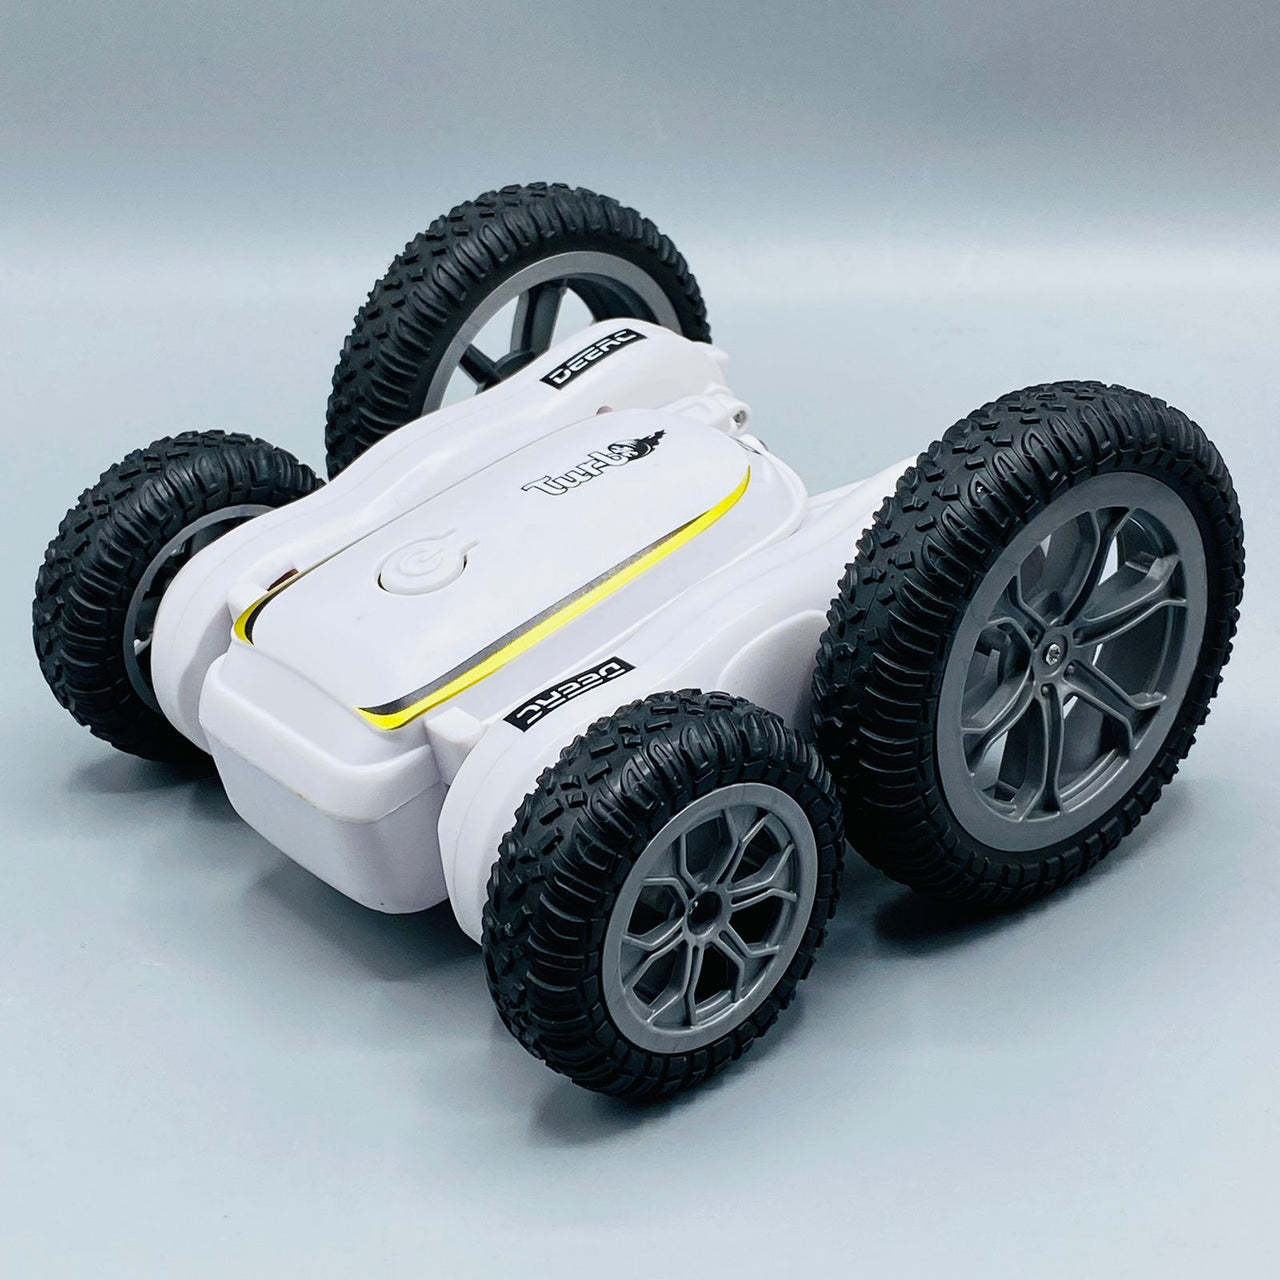 rc 4wd off road high speed stunt car